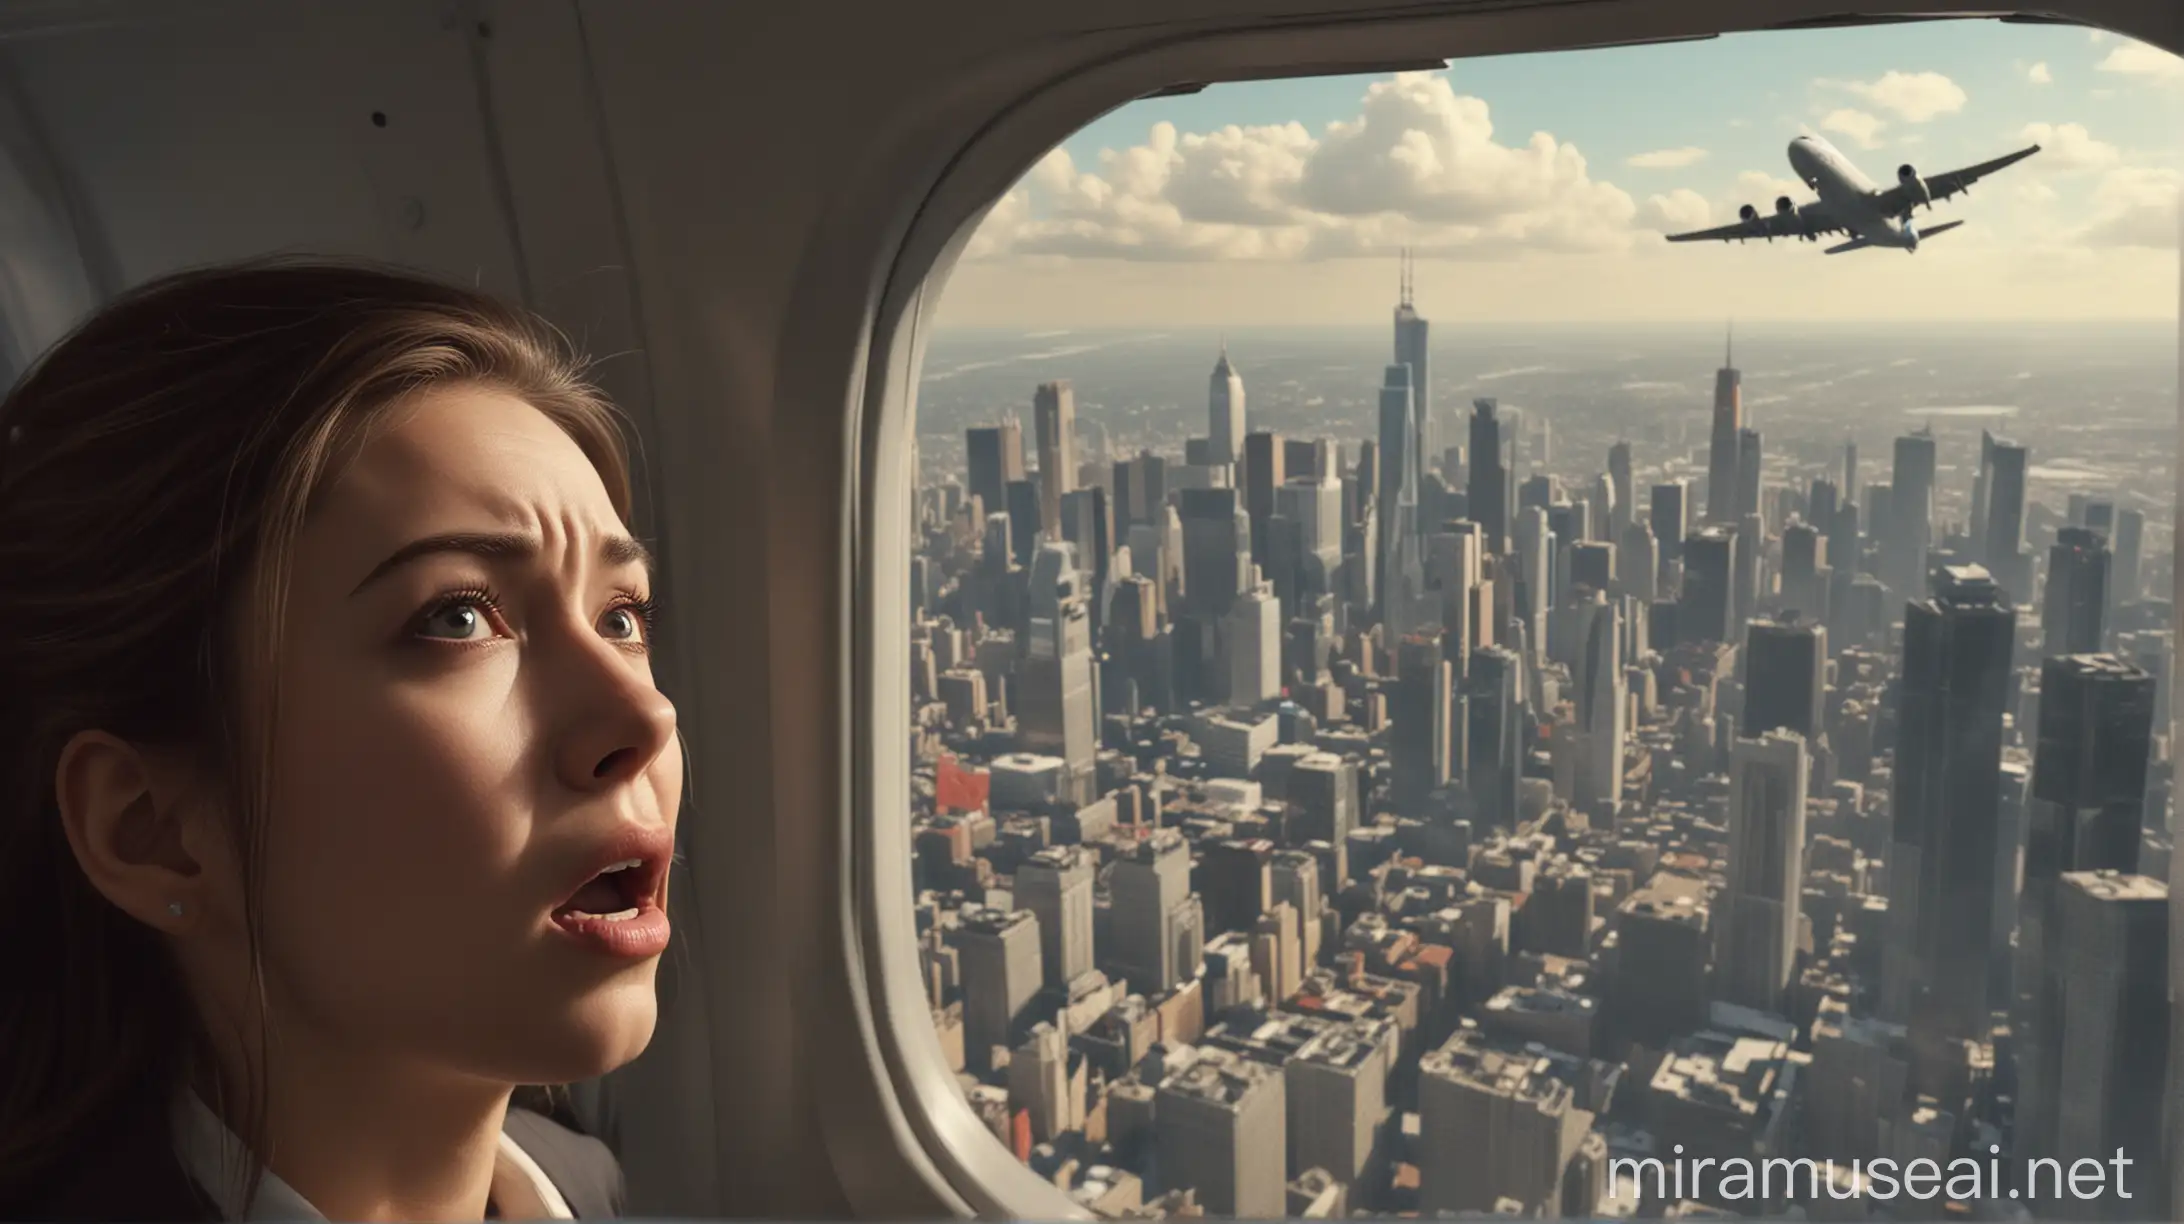 Terrified Woman Looking Out of Airplane Window Over City Skyscrapers